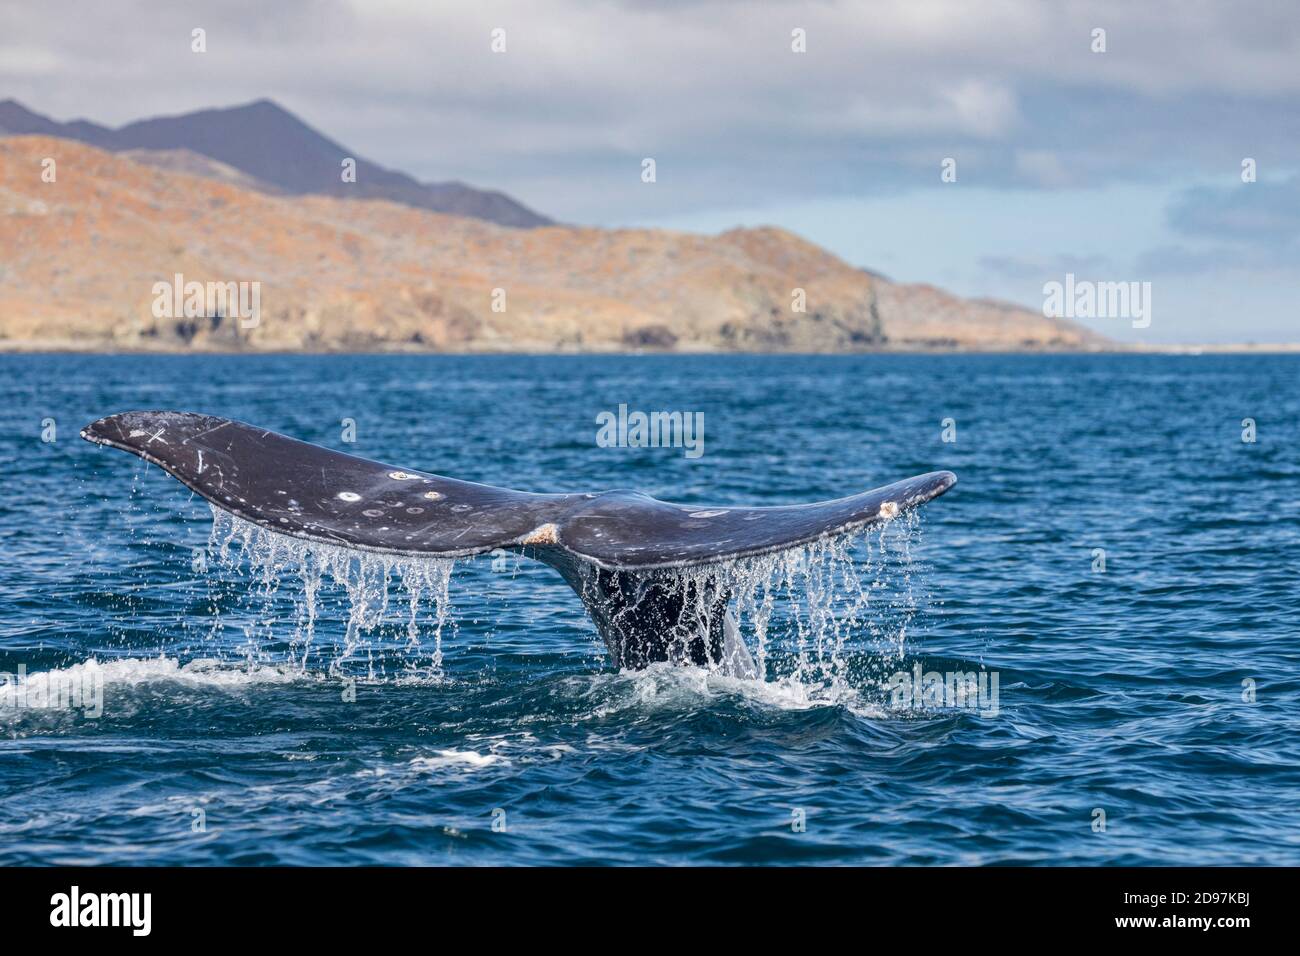 Grey whale (Eschrichtius robustus) diving with tail fluke above water, Magdalena Bay, Baja California, Mexico. Stock Photo